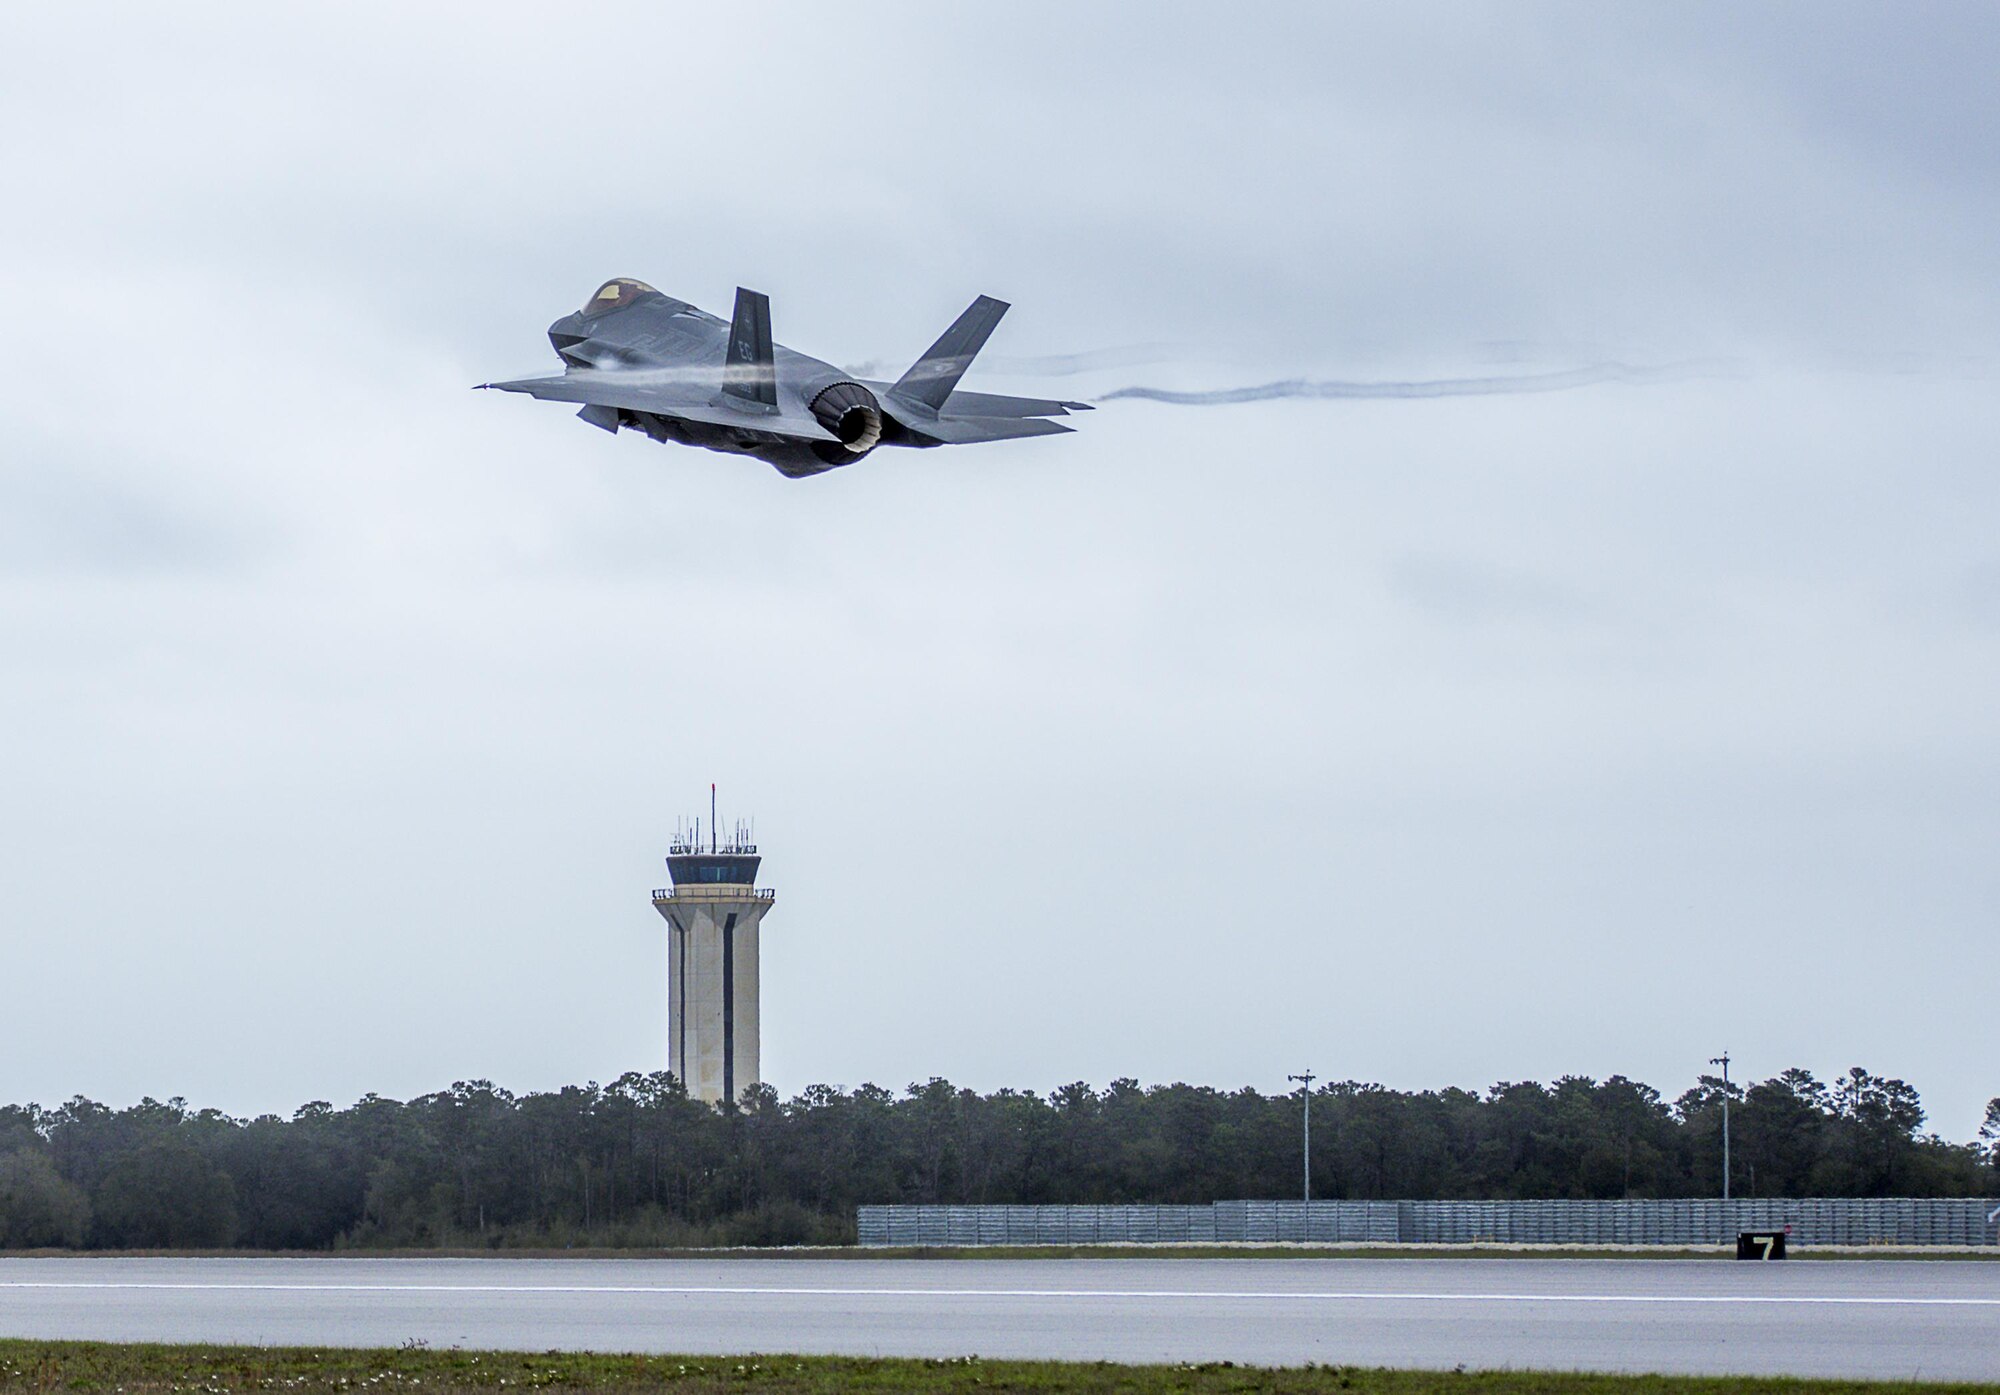 A 33rd Fighter Wing F-35A takes off Feb. 27 to conduct sorties at Eglin Air Force Base, Fla. With conventional takeoff and landing capability, the F-35A is built for traditional Air Force bases. The F-35A is an agile, versatile, high-performance, 9g capable multirole fighter that combines stealth, sensor fusion, and unprecedented situational awareness. The 33rd Fighter Wing is a graduate flying and maintenance training wing for the F-35 Lightning II. (U.S. Air Force photo/Kristin Stewart)